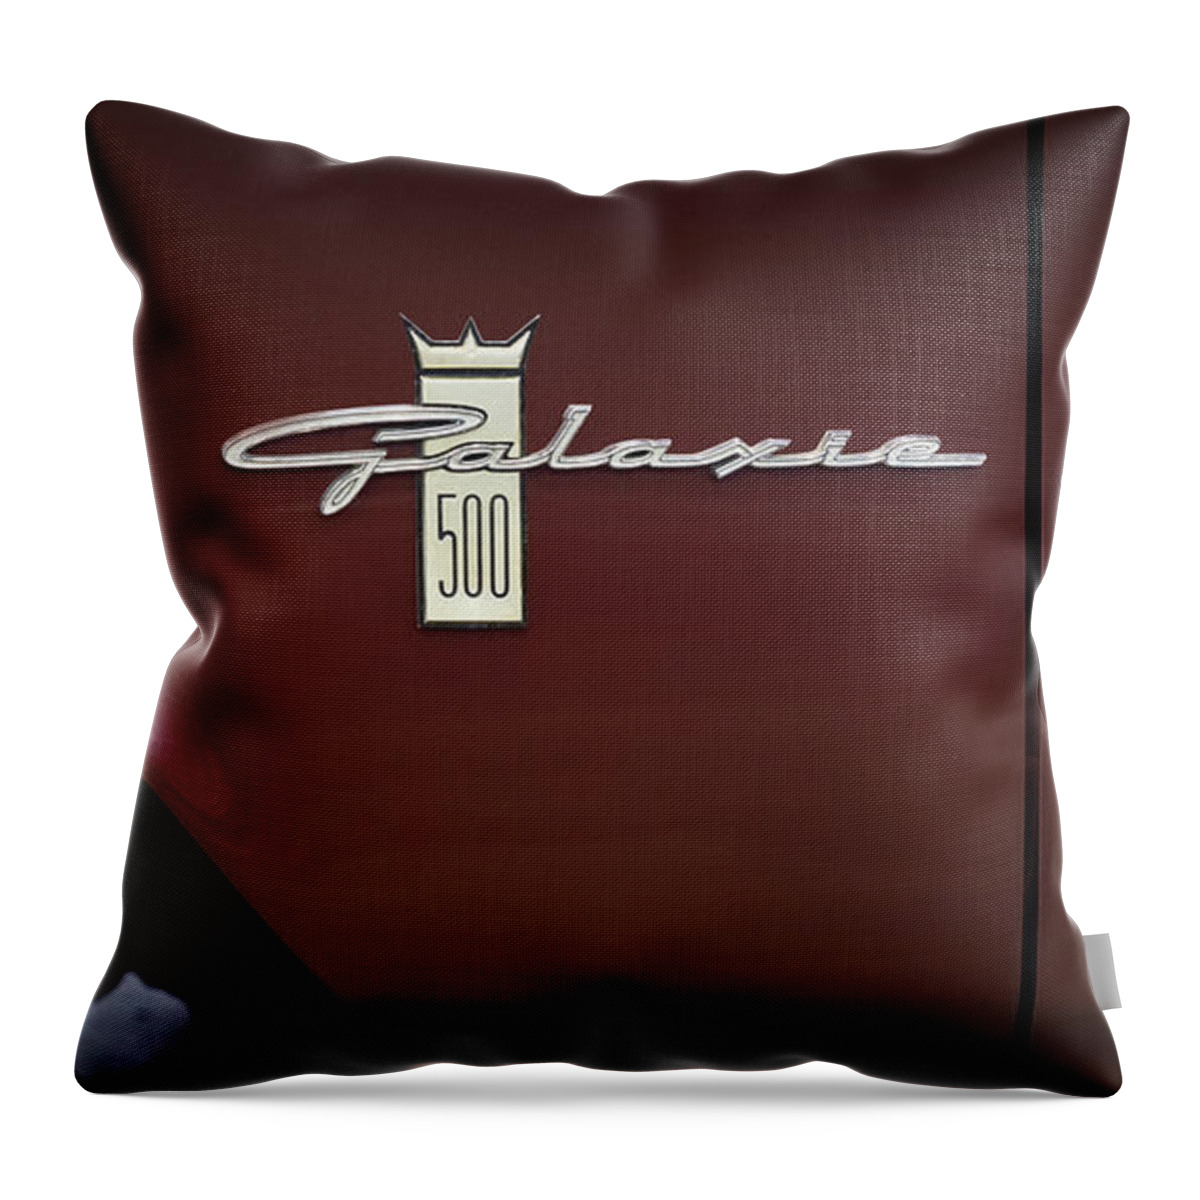 Ford Throw Pillow featuring the photograph Ford Galaxie 500 by Mike McGlothlen